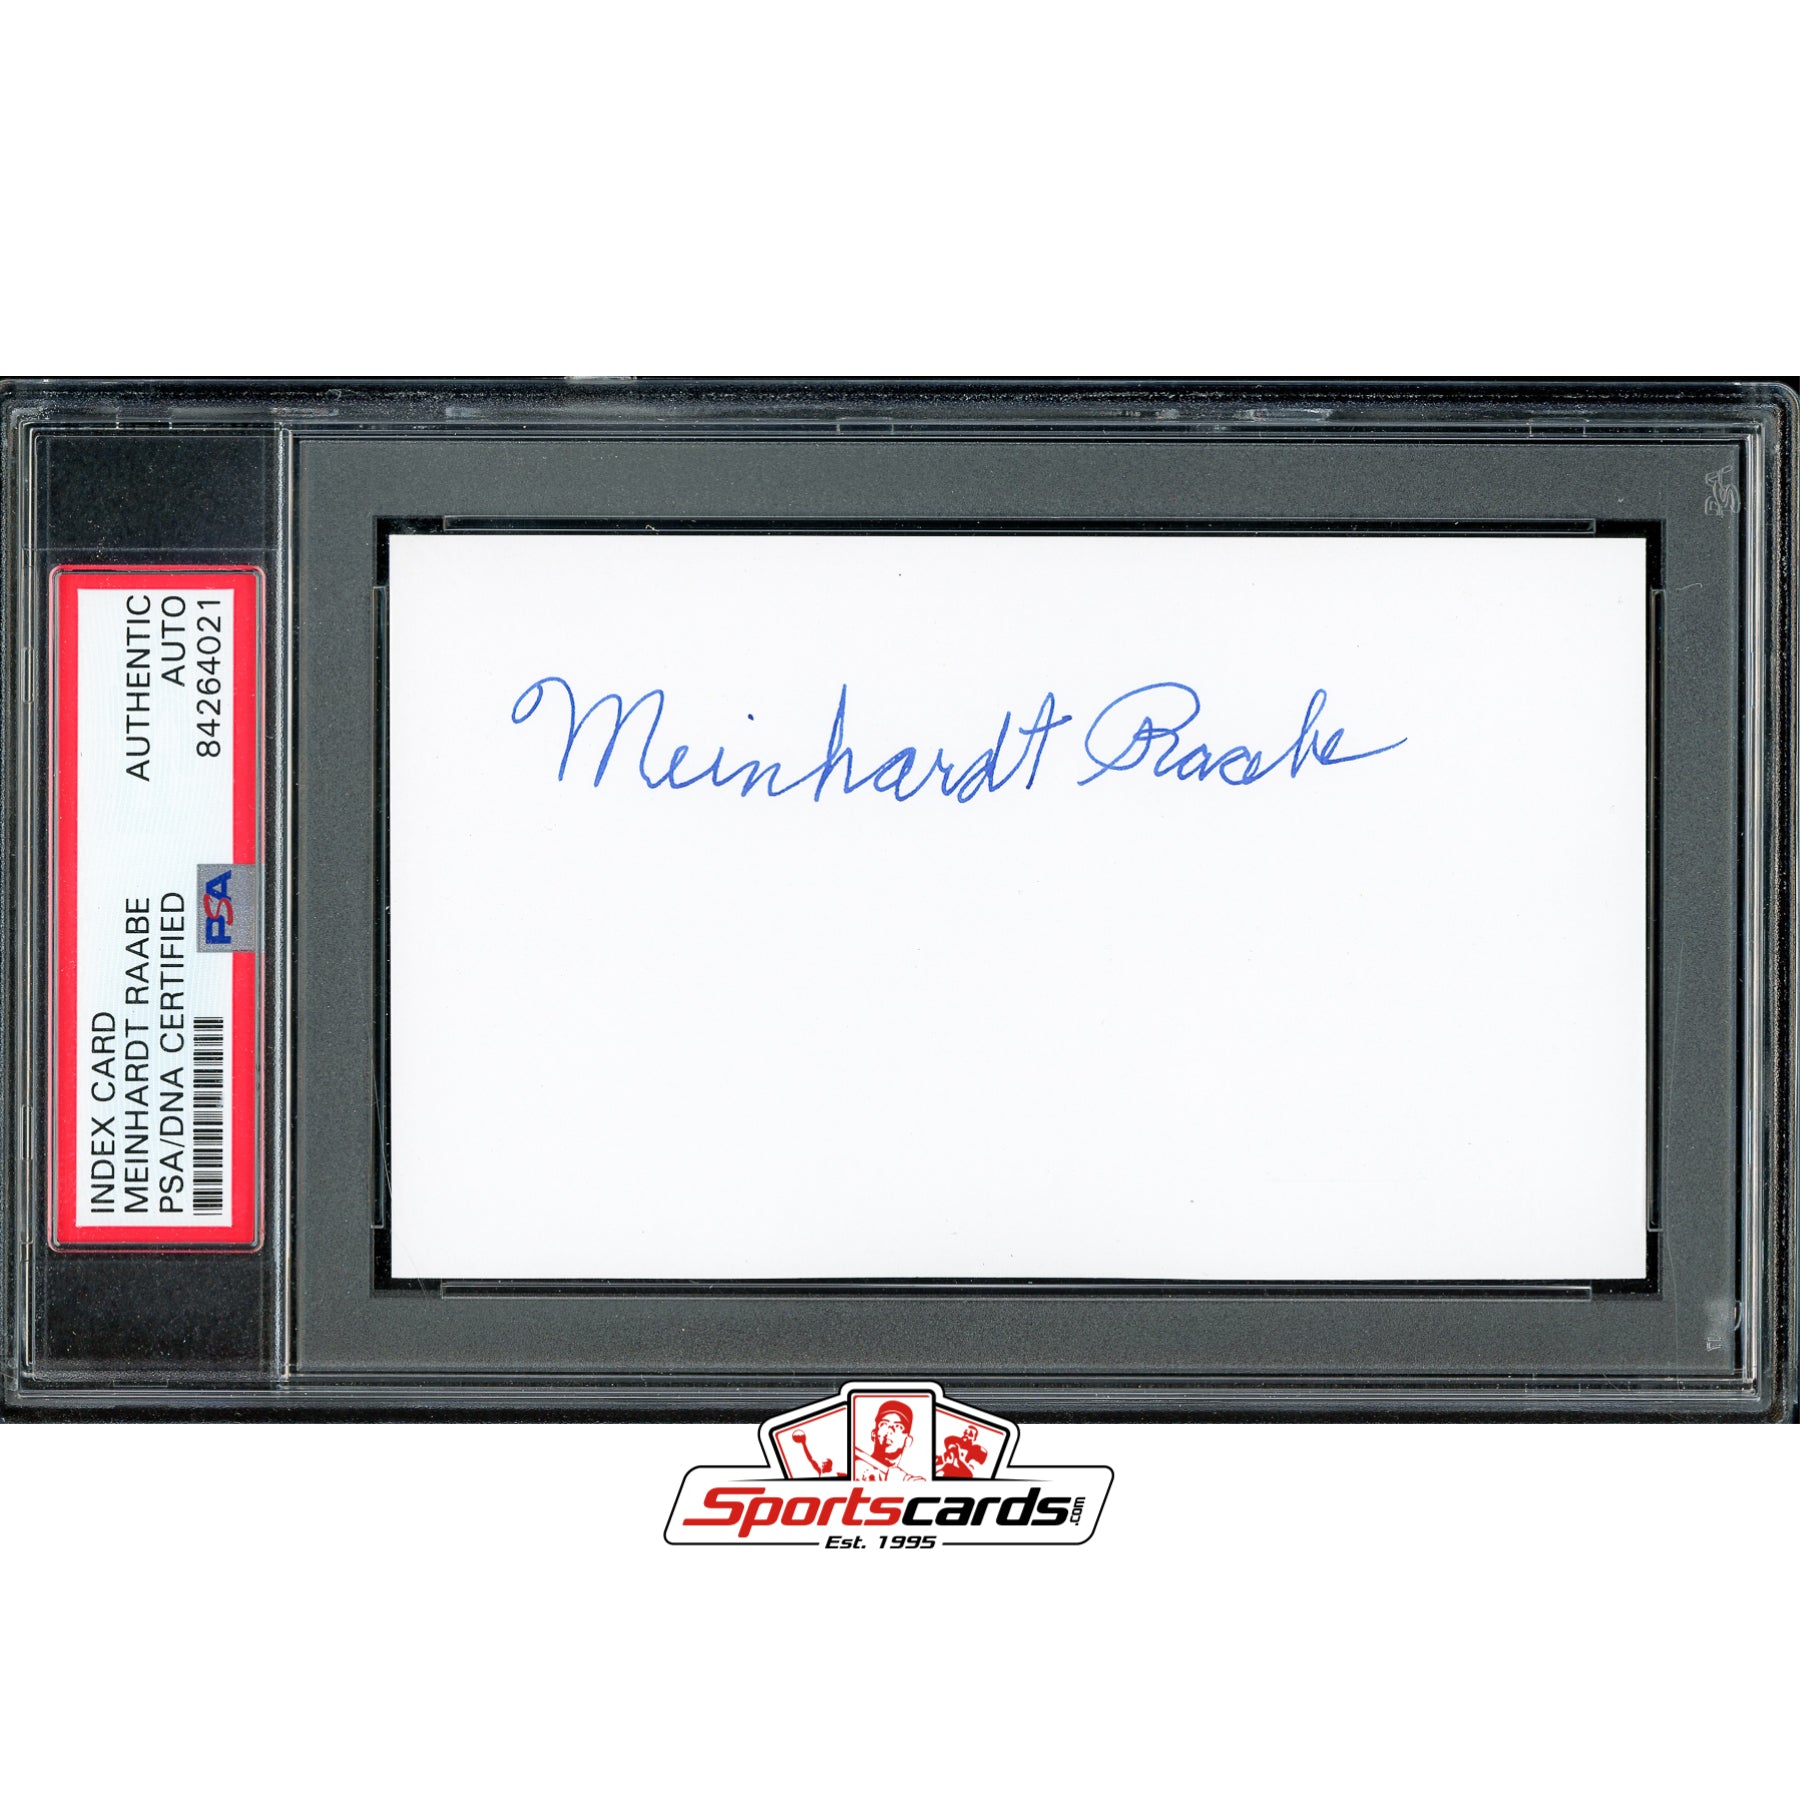 Meinhardt Raabe Signed Autographed 3x5 Index Card PSA/DNA Wizard of Oz